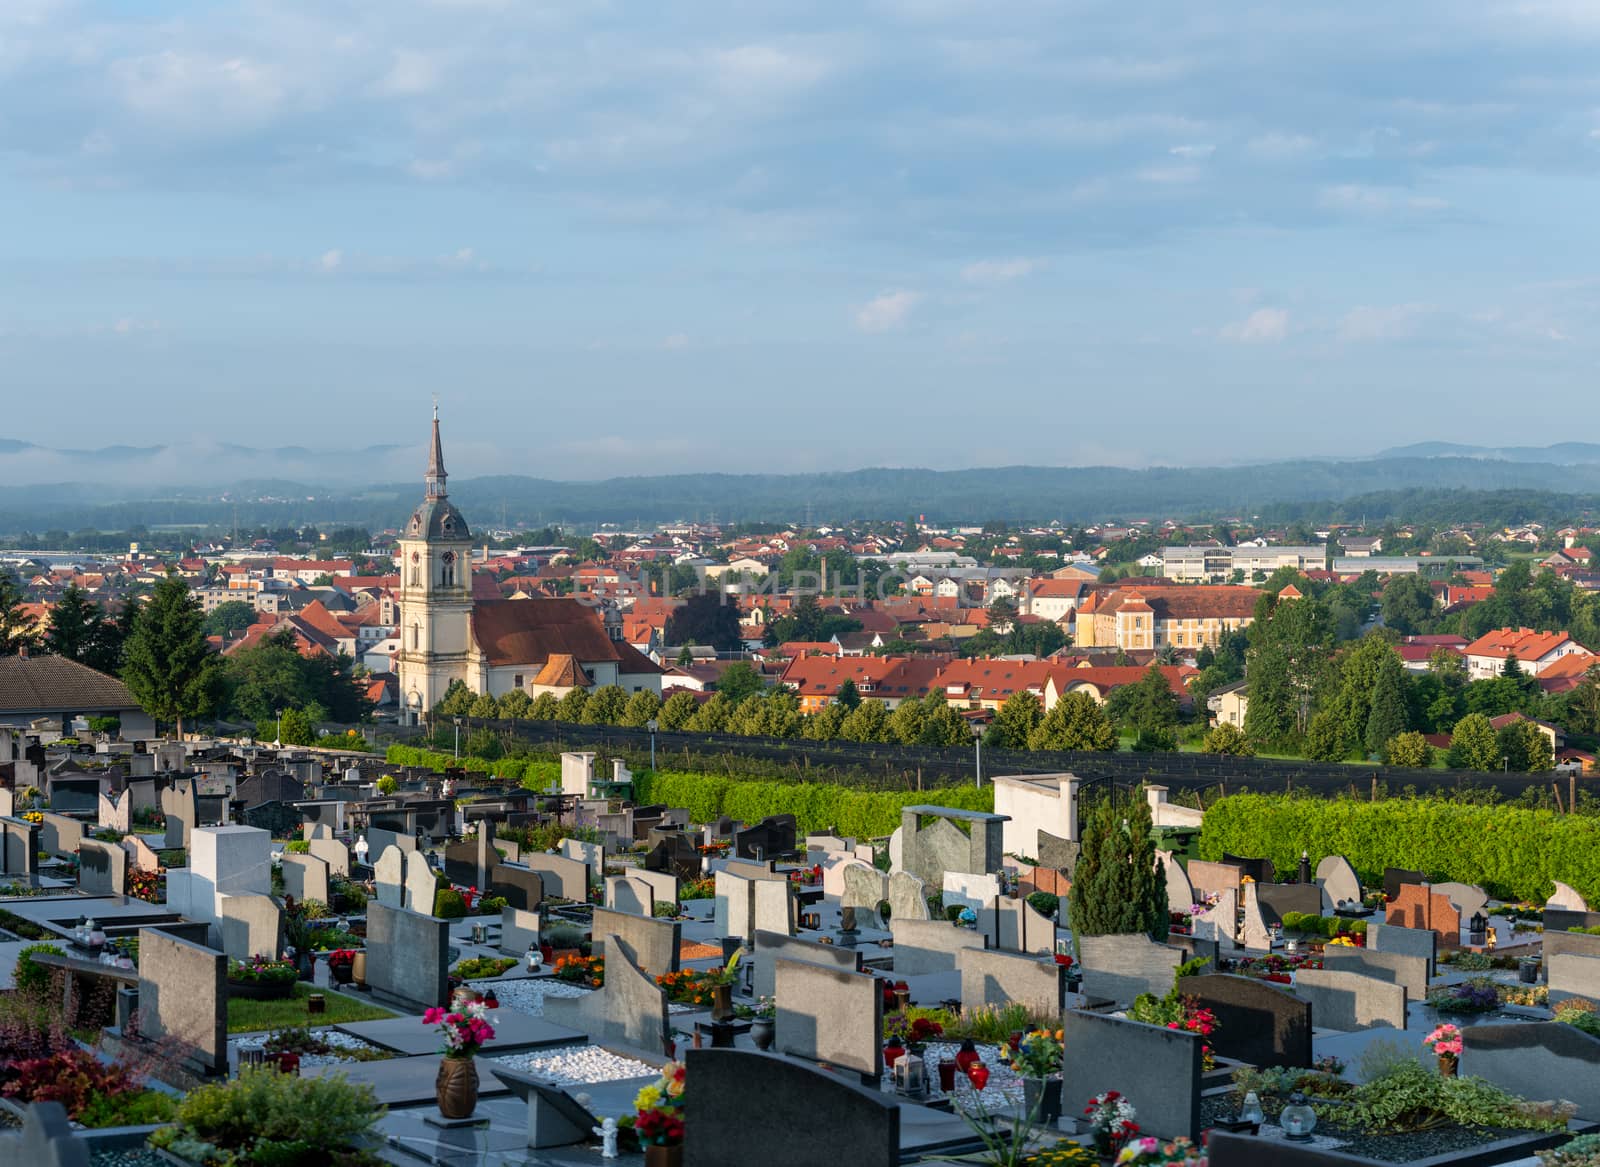 Panoramic view of Slovenska Bistrica, Slovenia, the church of St. Bartholomew dominates the towns skyline, cemetery in front